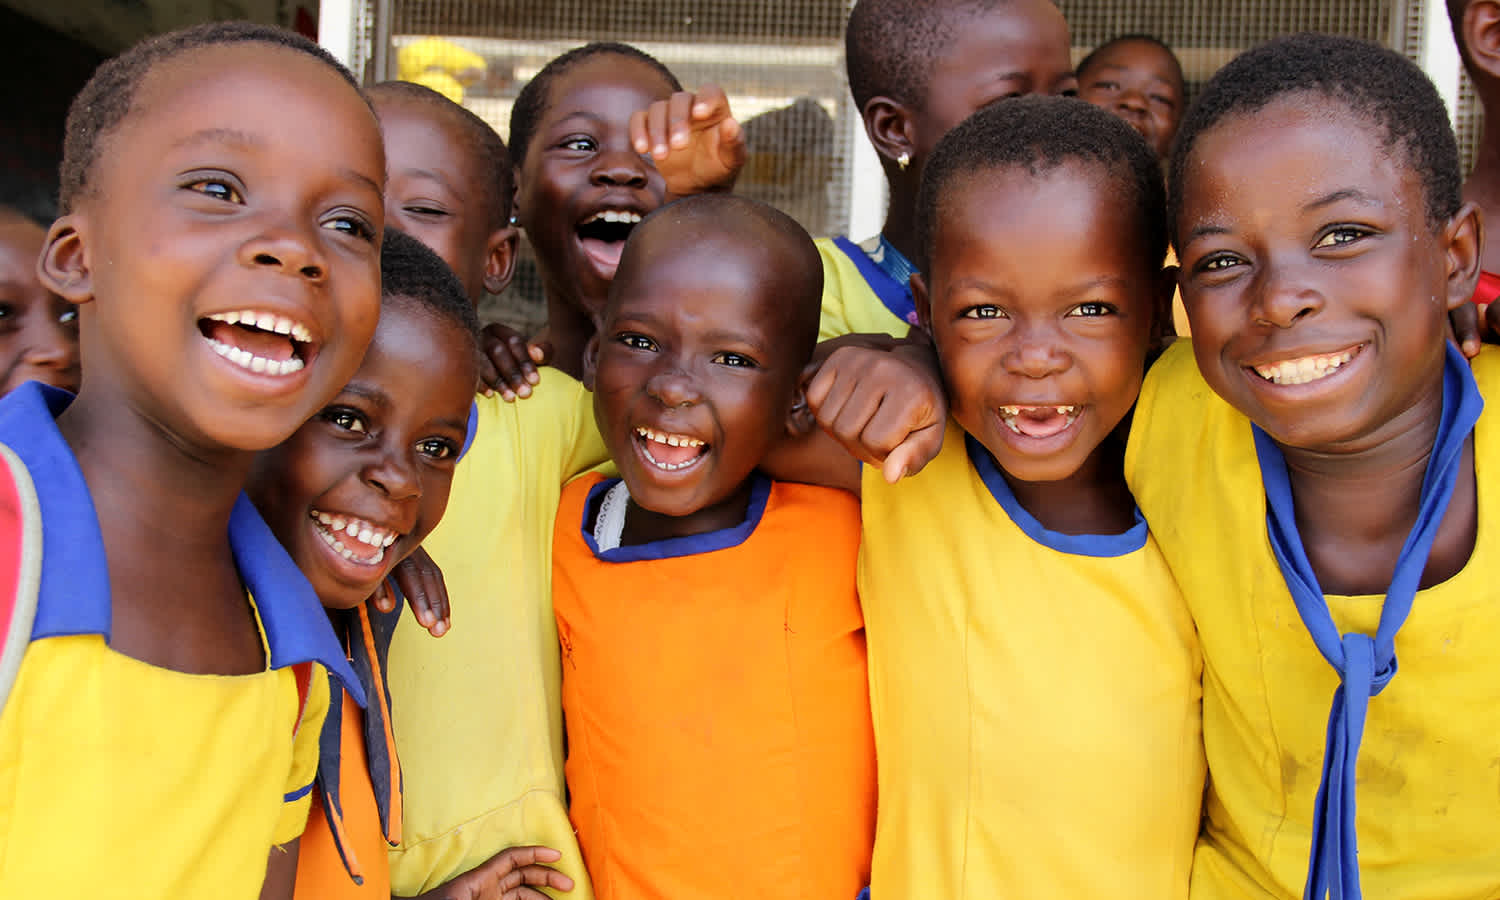 Afrikids. A group of laughing school-aged children in orange-yellow uniforms